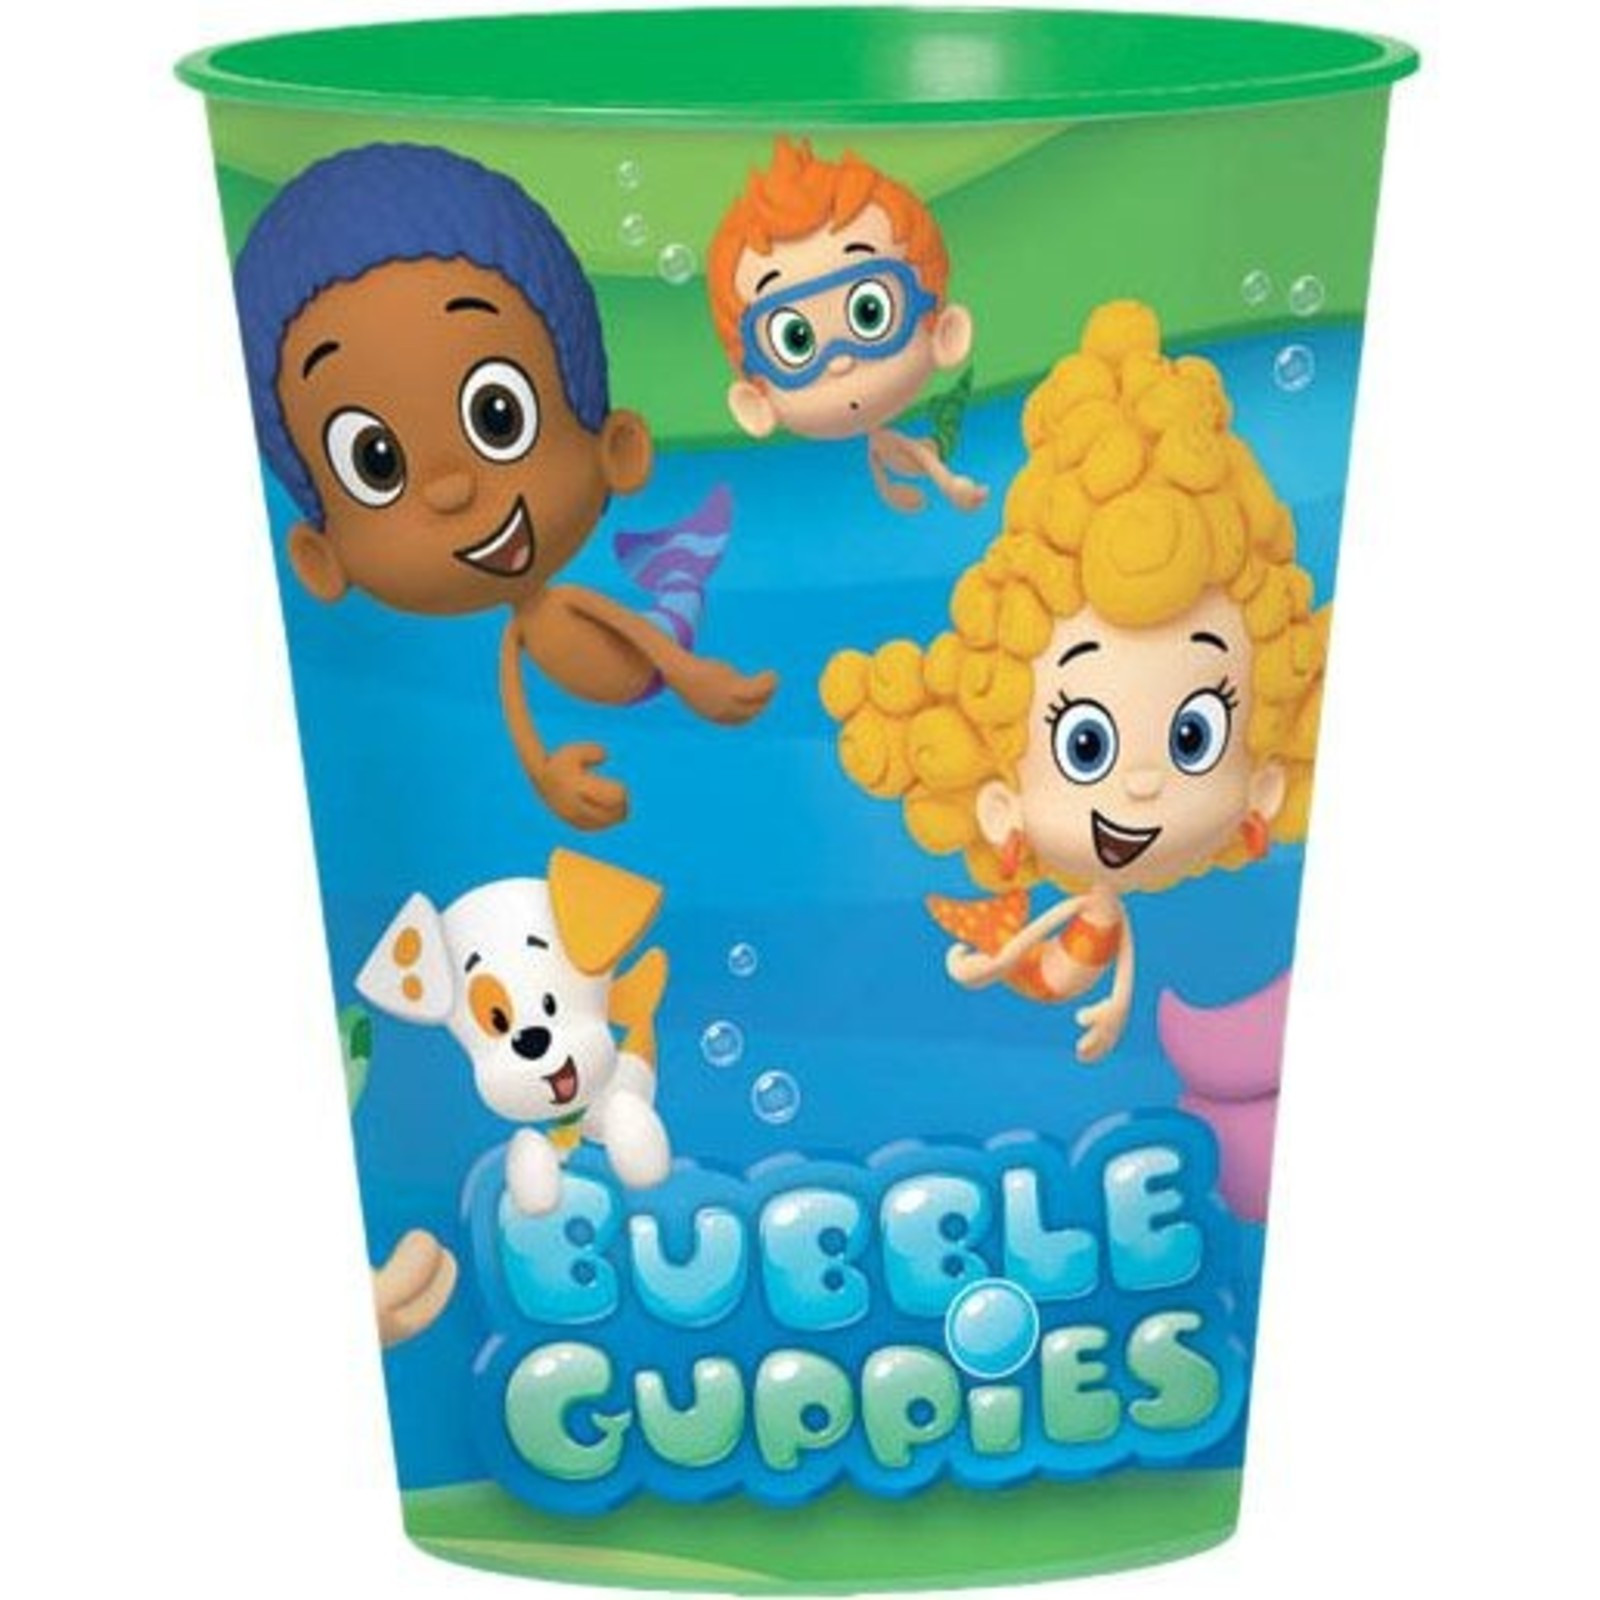 Bubble Guppies Birthday Party Supplies
 Bubble Guppies Nick Jr Favor Cup 16 Oz Each Birthday